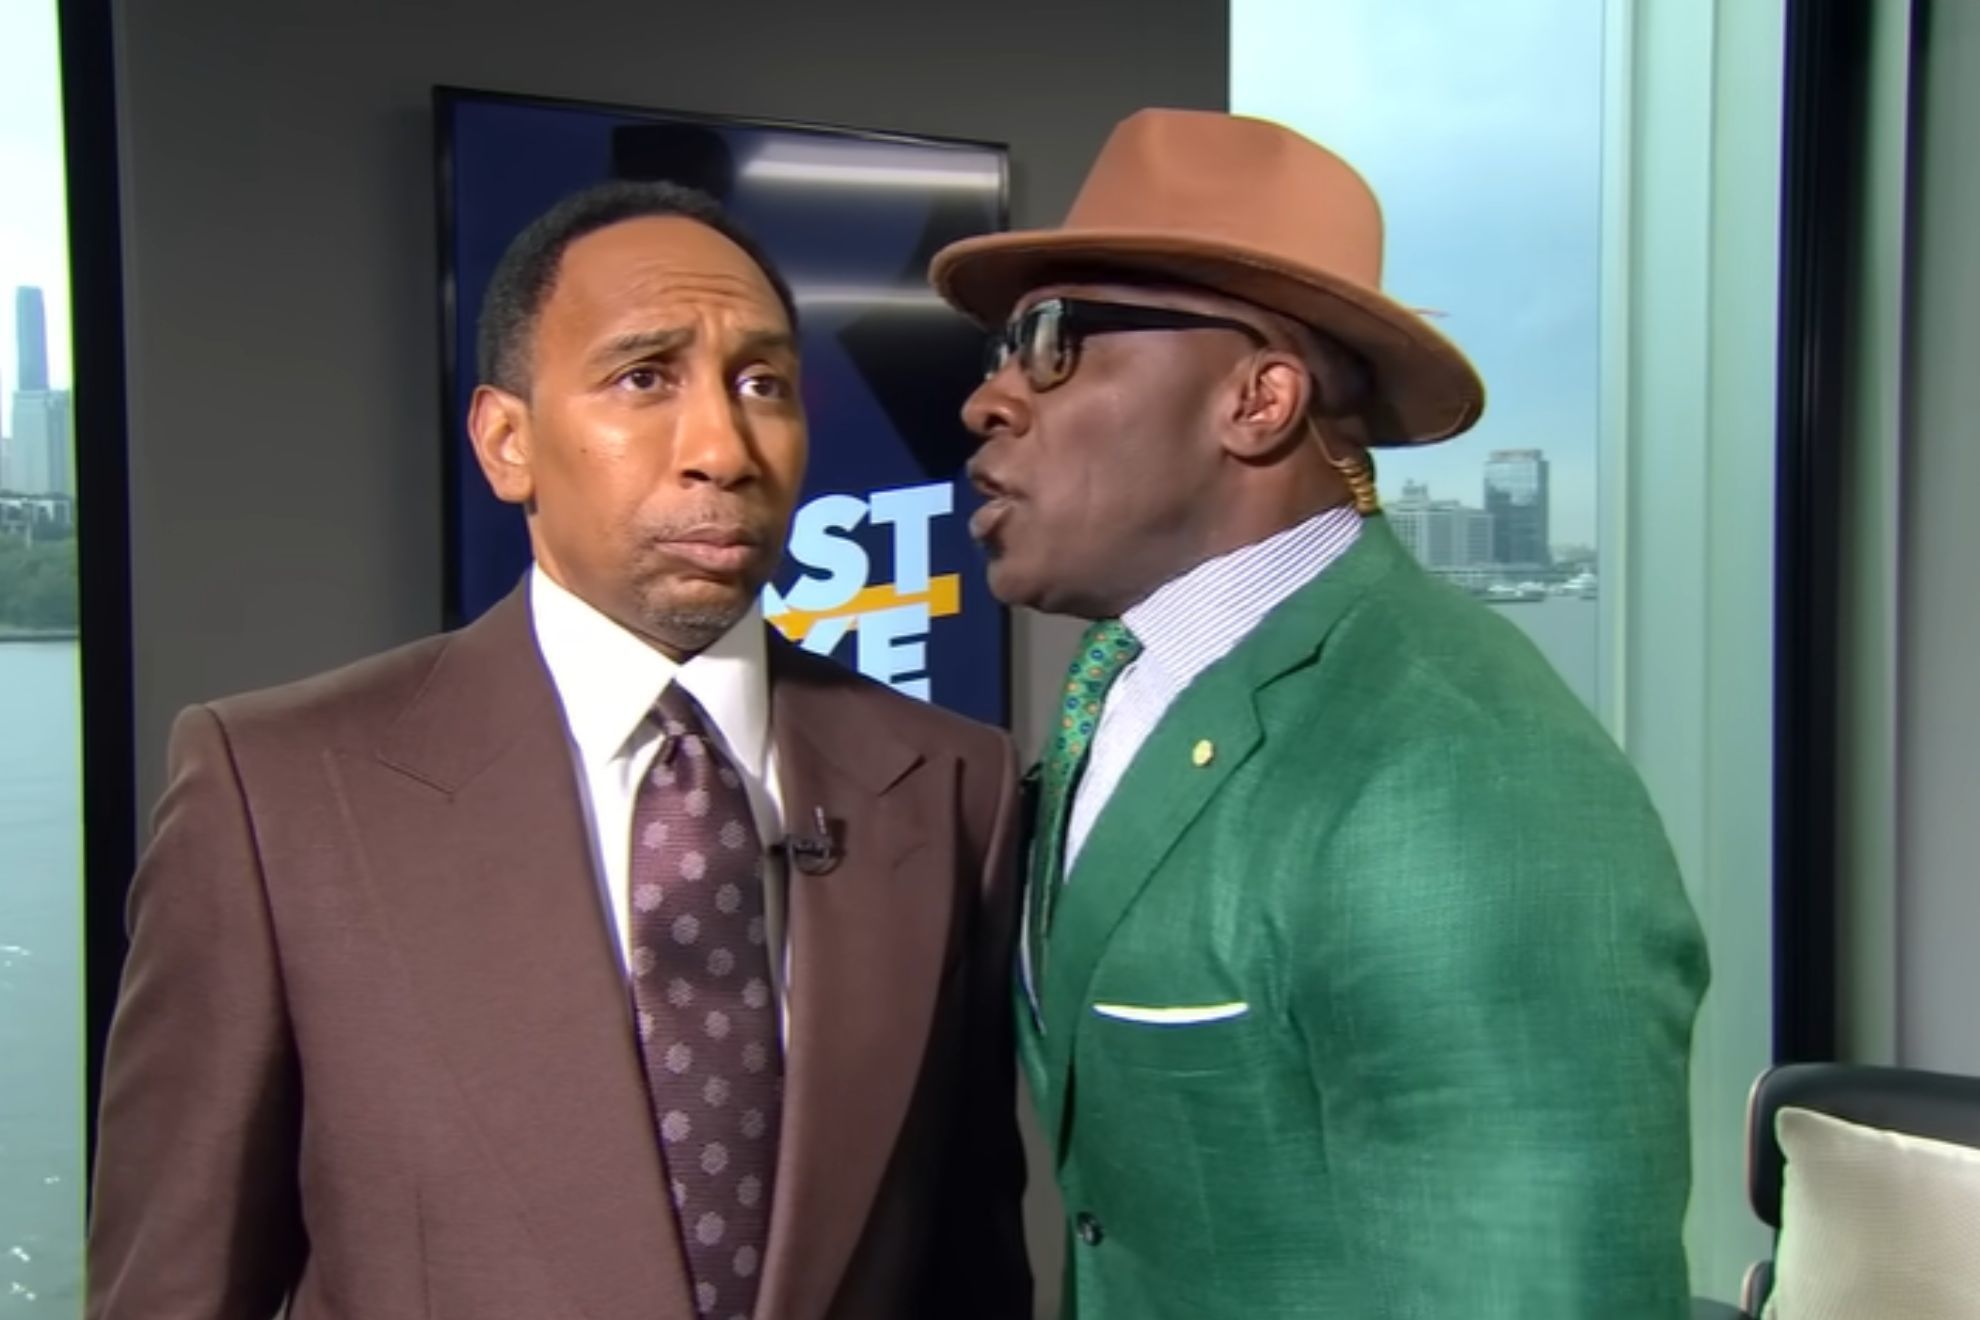 Shannon Sharpe calls Stephen A. Smith 'Skip' twice during First Take debut